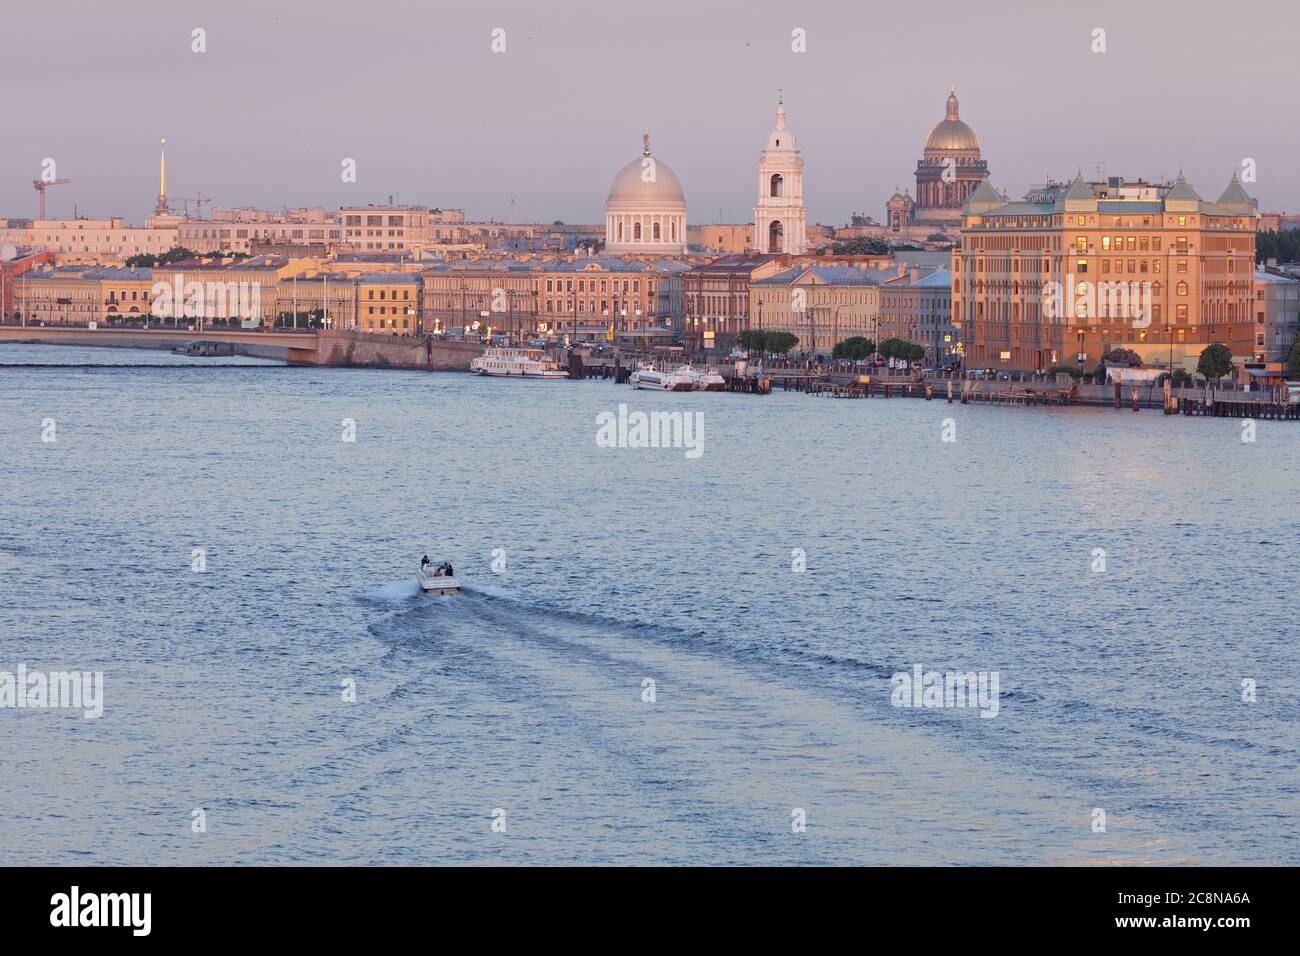 Cityscape of St. Petersburg, Russia with a boat on Little Neva against Vasilievsky island and a dominated golden dome of St. Isaac's cathedral Stock Photo